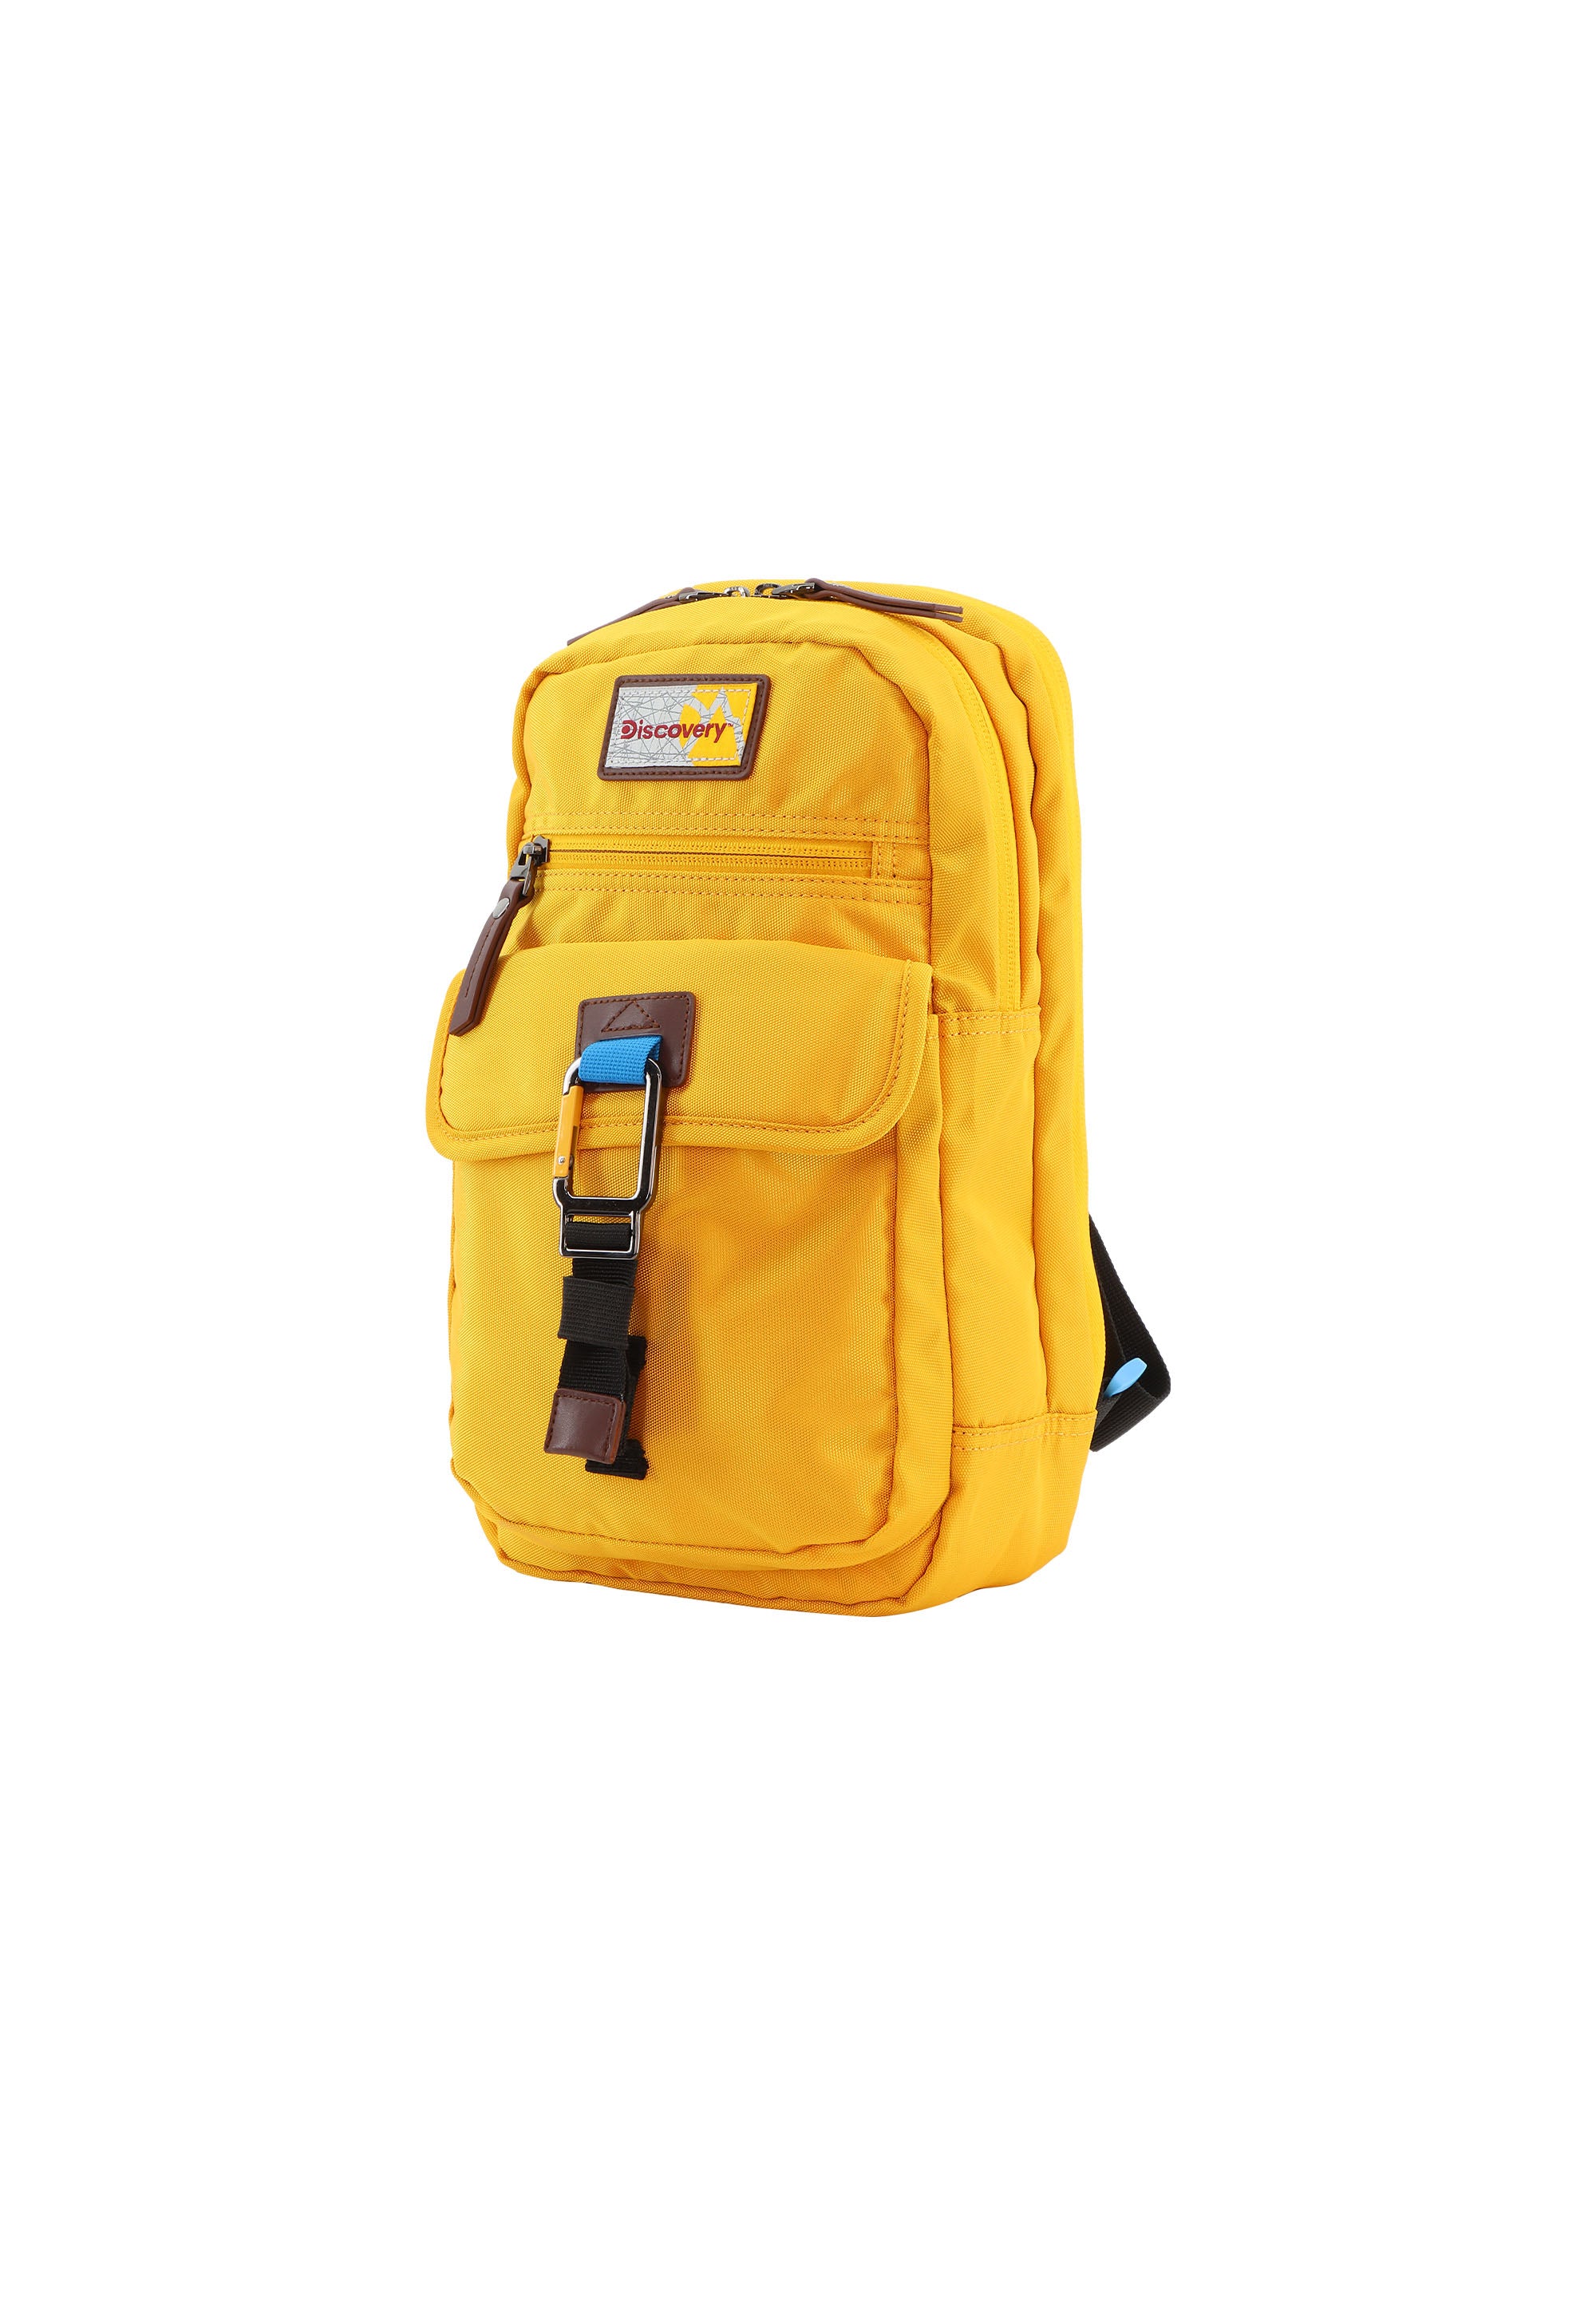 Discovery Icon One Shoulder Rucksack - D00720 Gelb